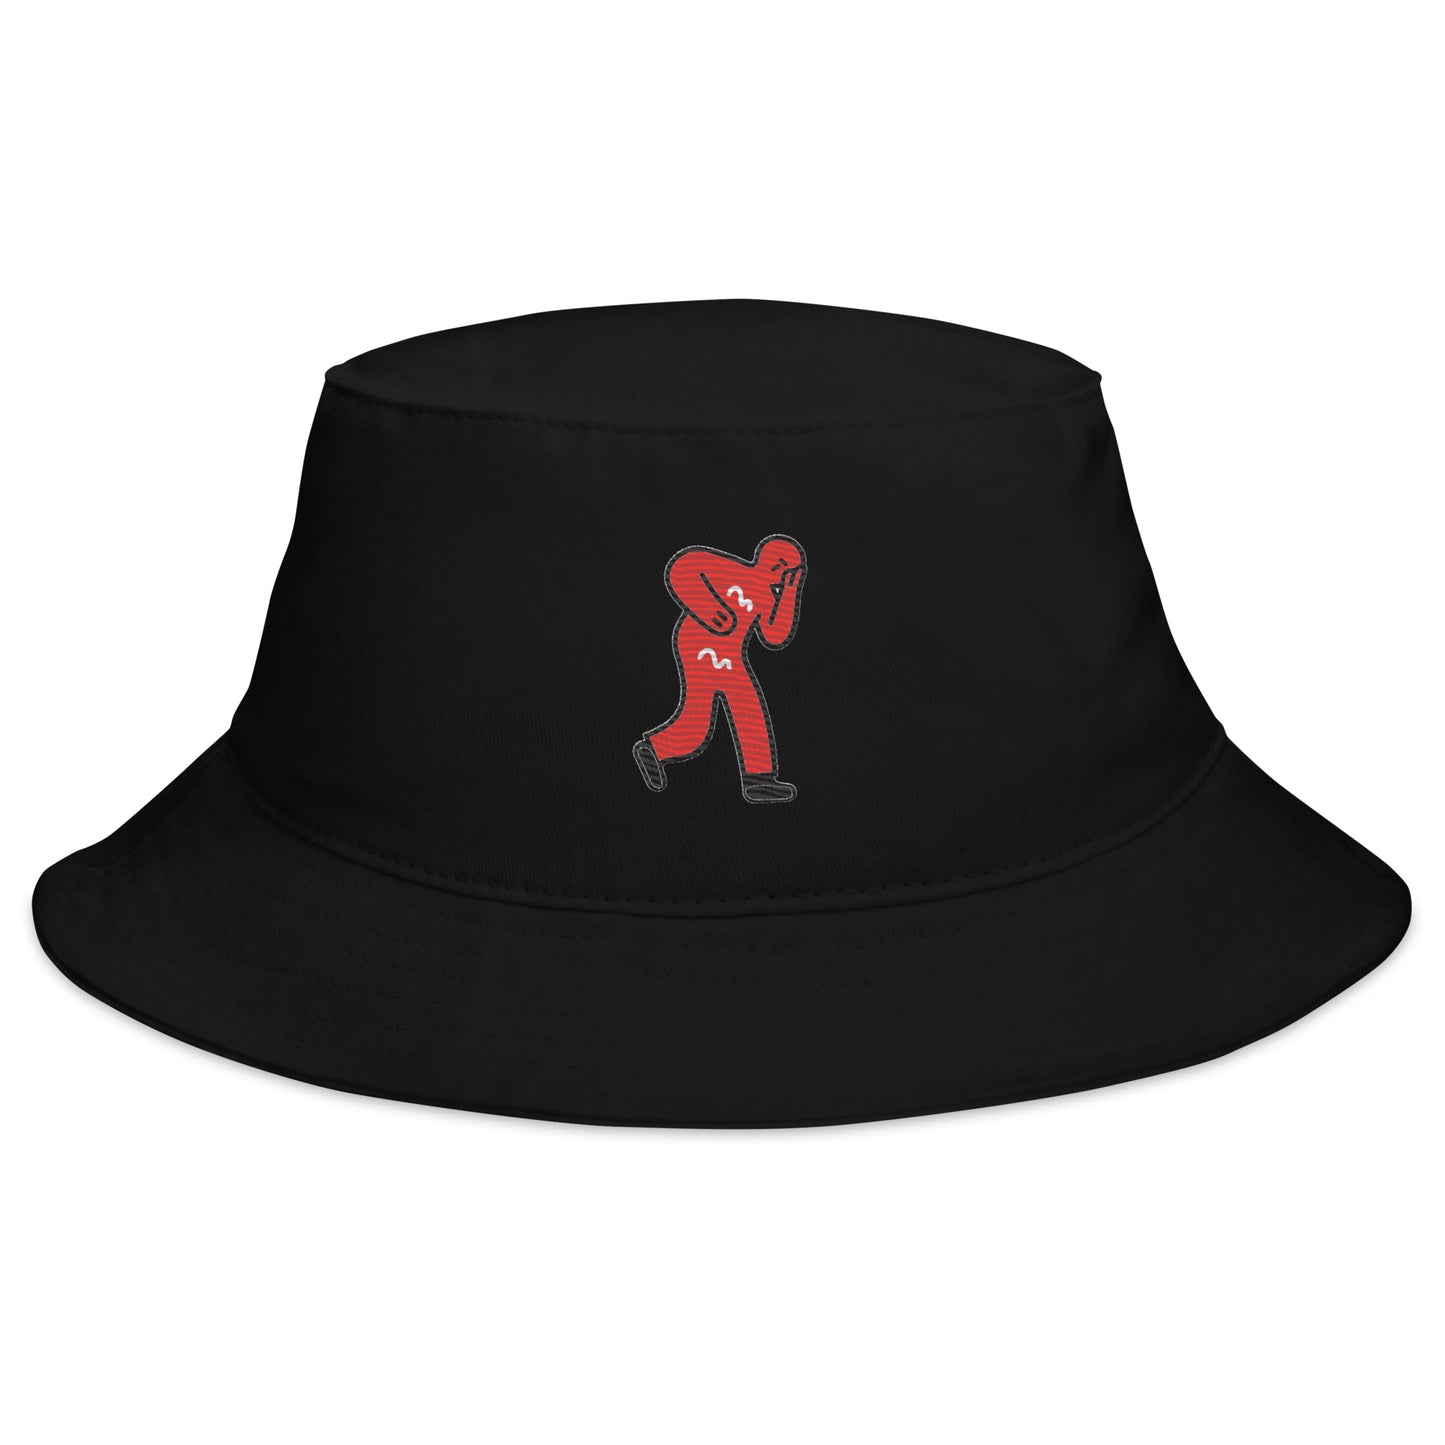 Doodles Me "Most Wanted" Bucket Hat #8